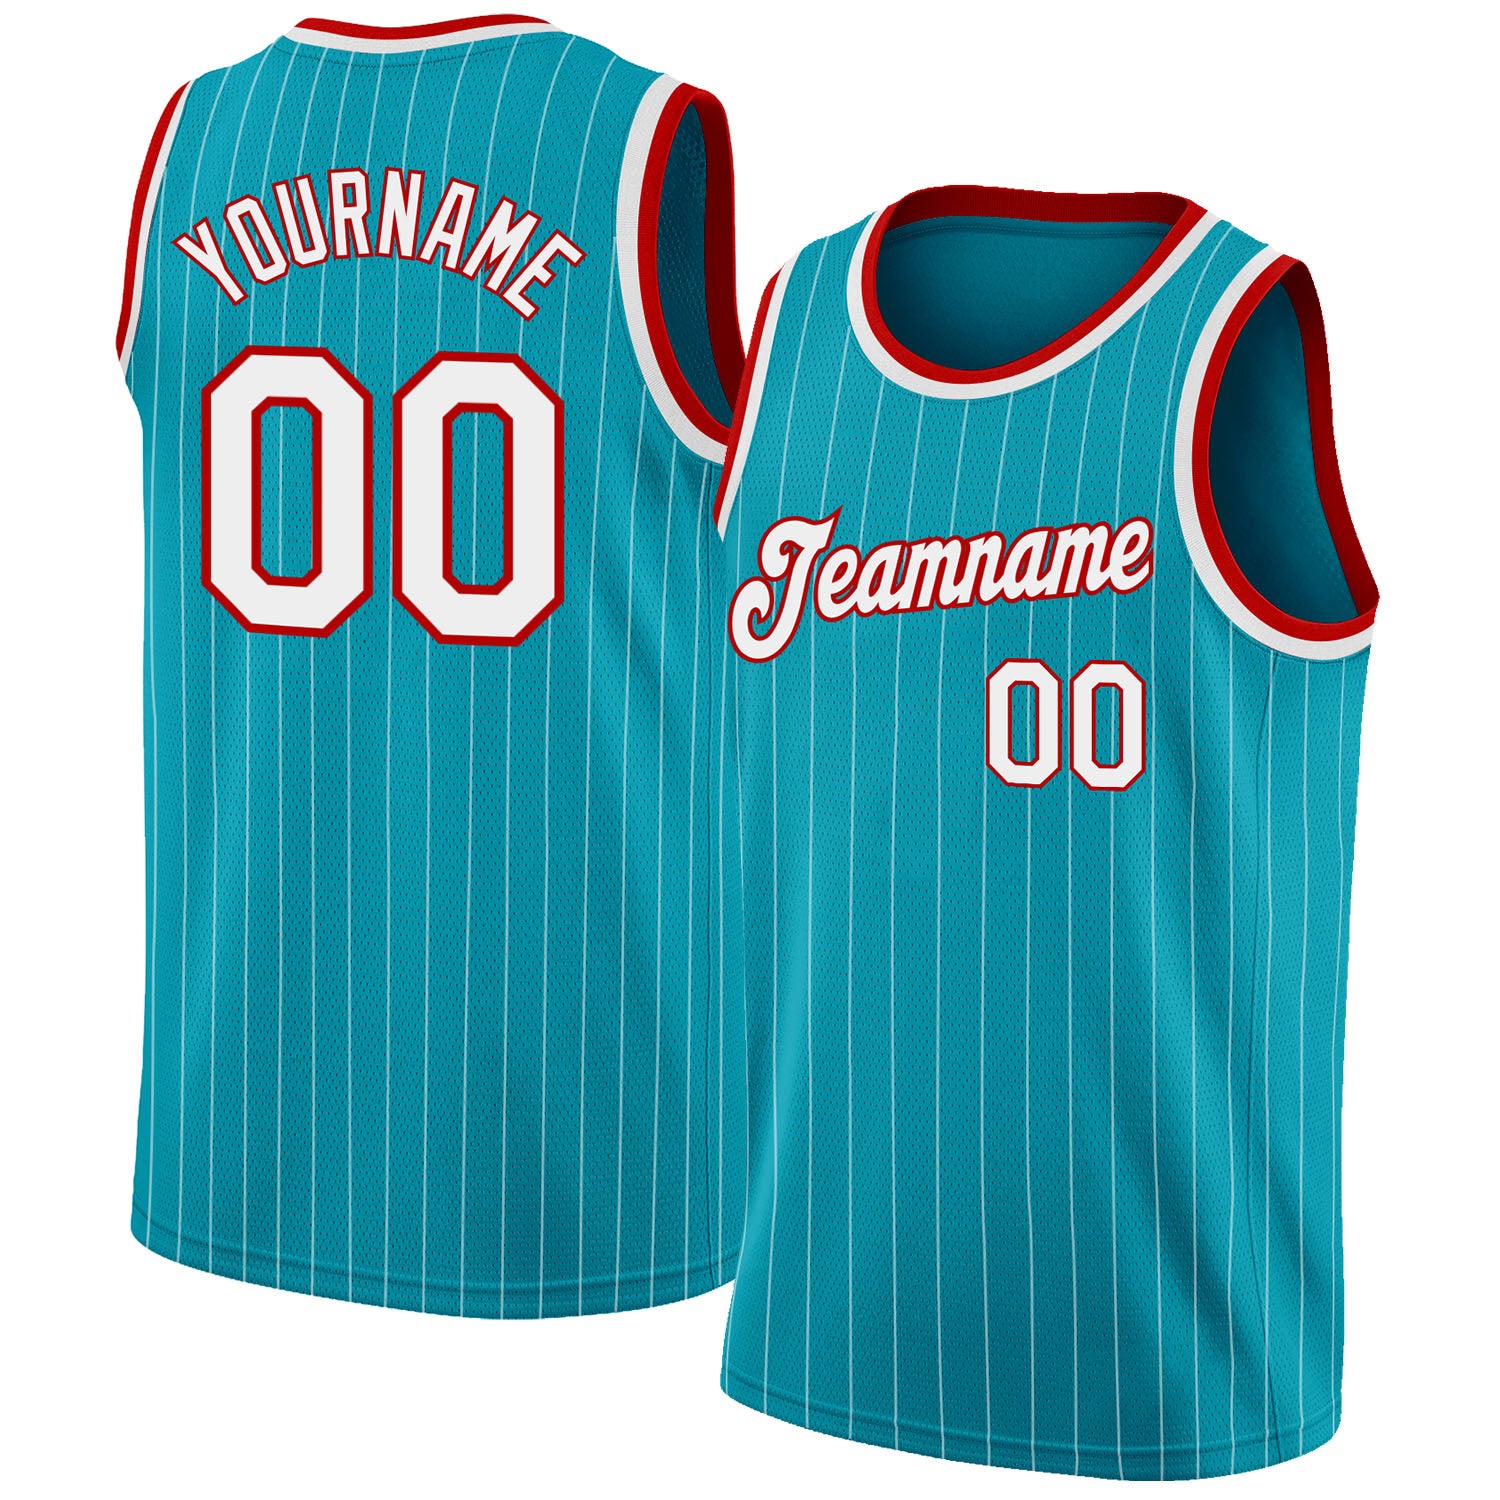 Custom Teal White Pinstripe White-Red Authentic Basketball Jersey Discount